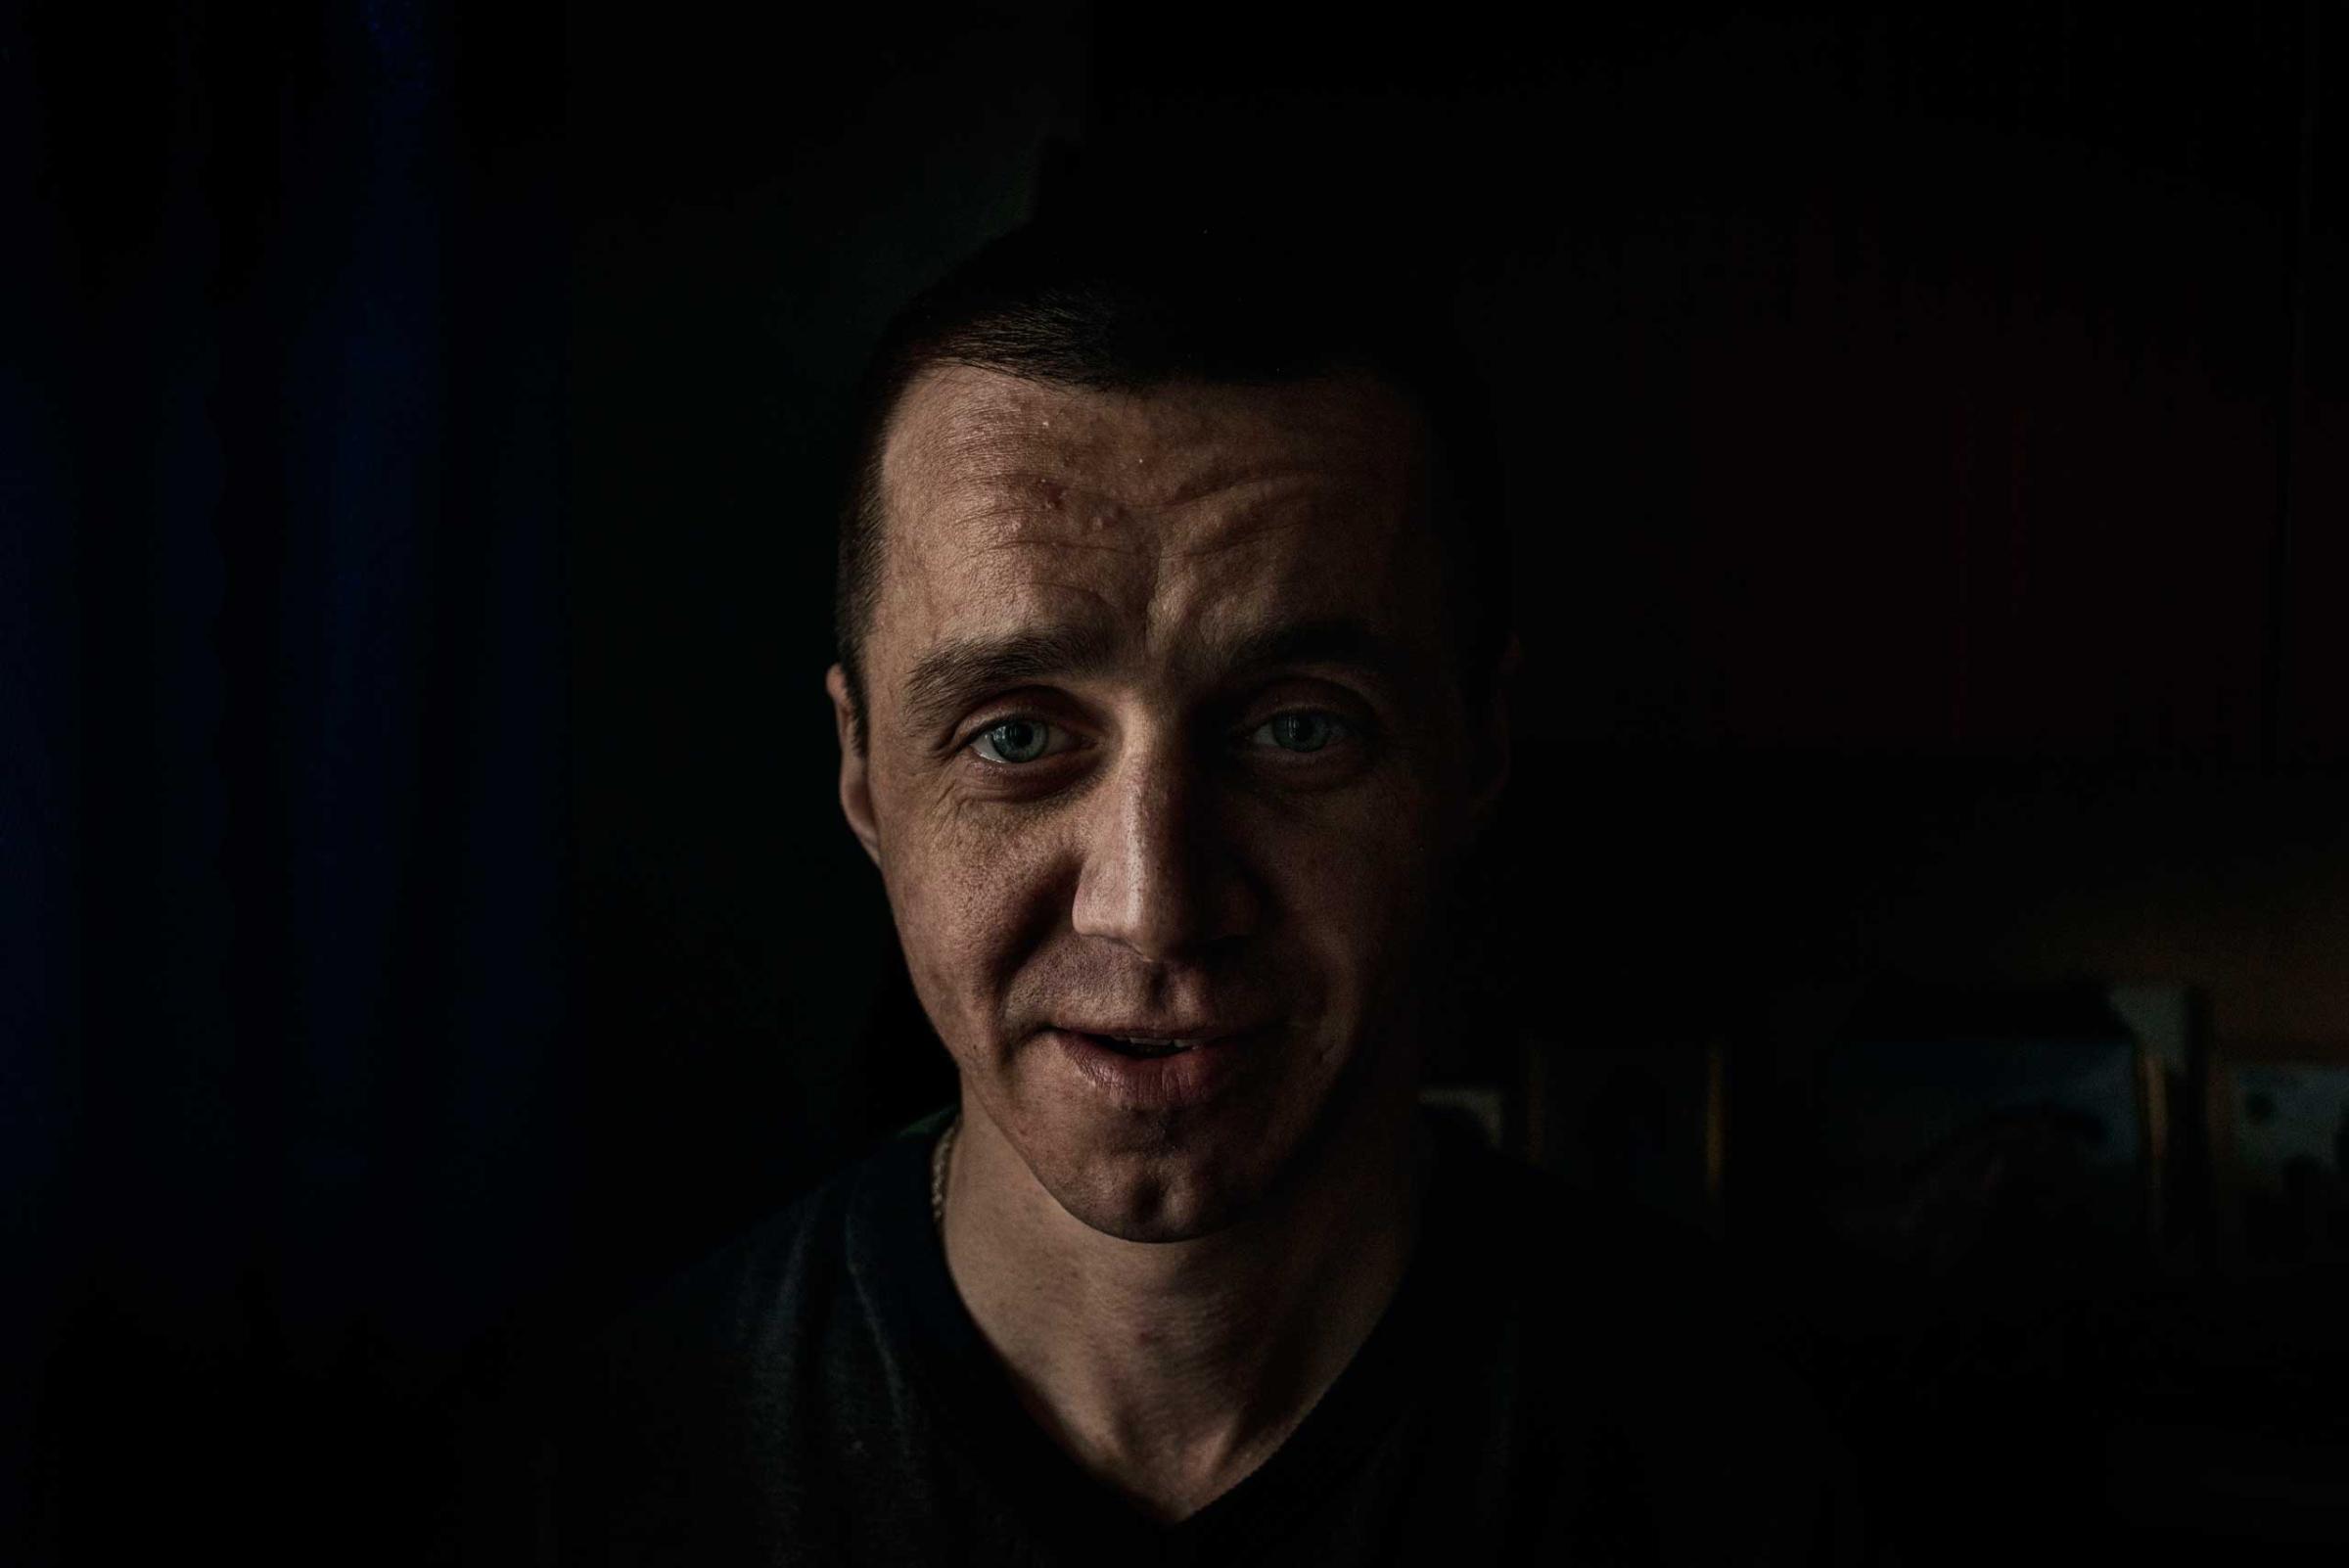 Pavel, a former krokodil user, quit completely to take drugs about two years ago. According to him after he was close to die for the third time in his life.